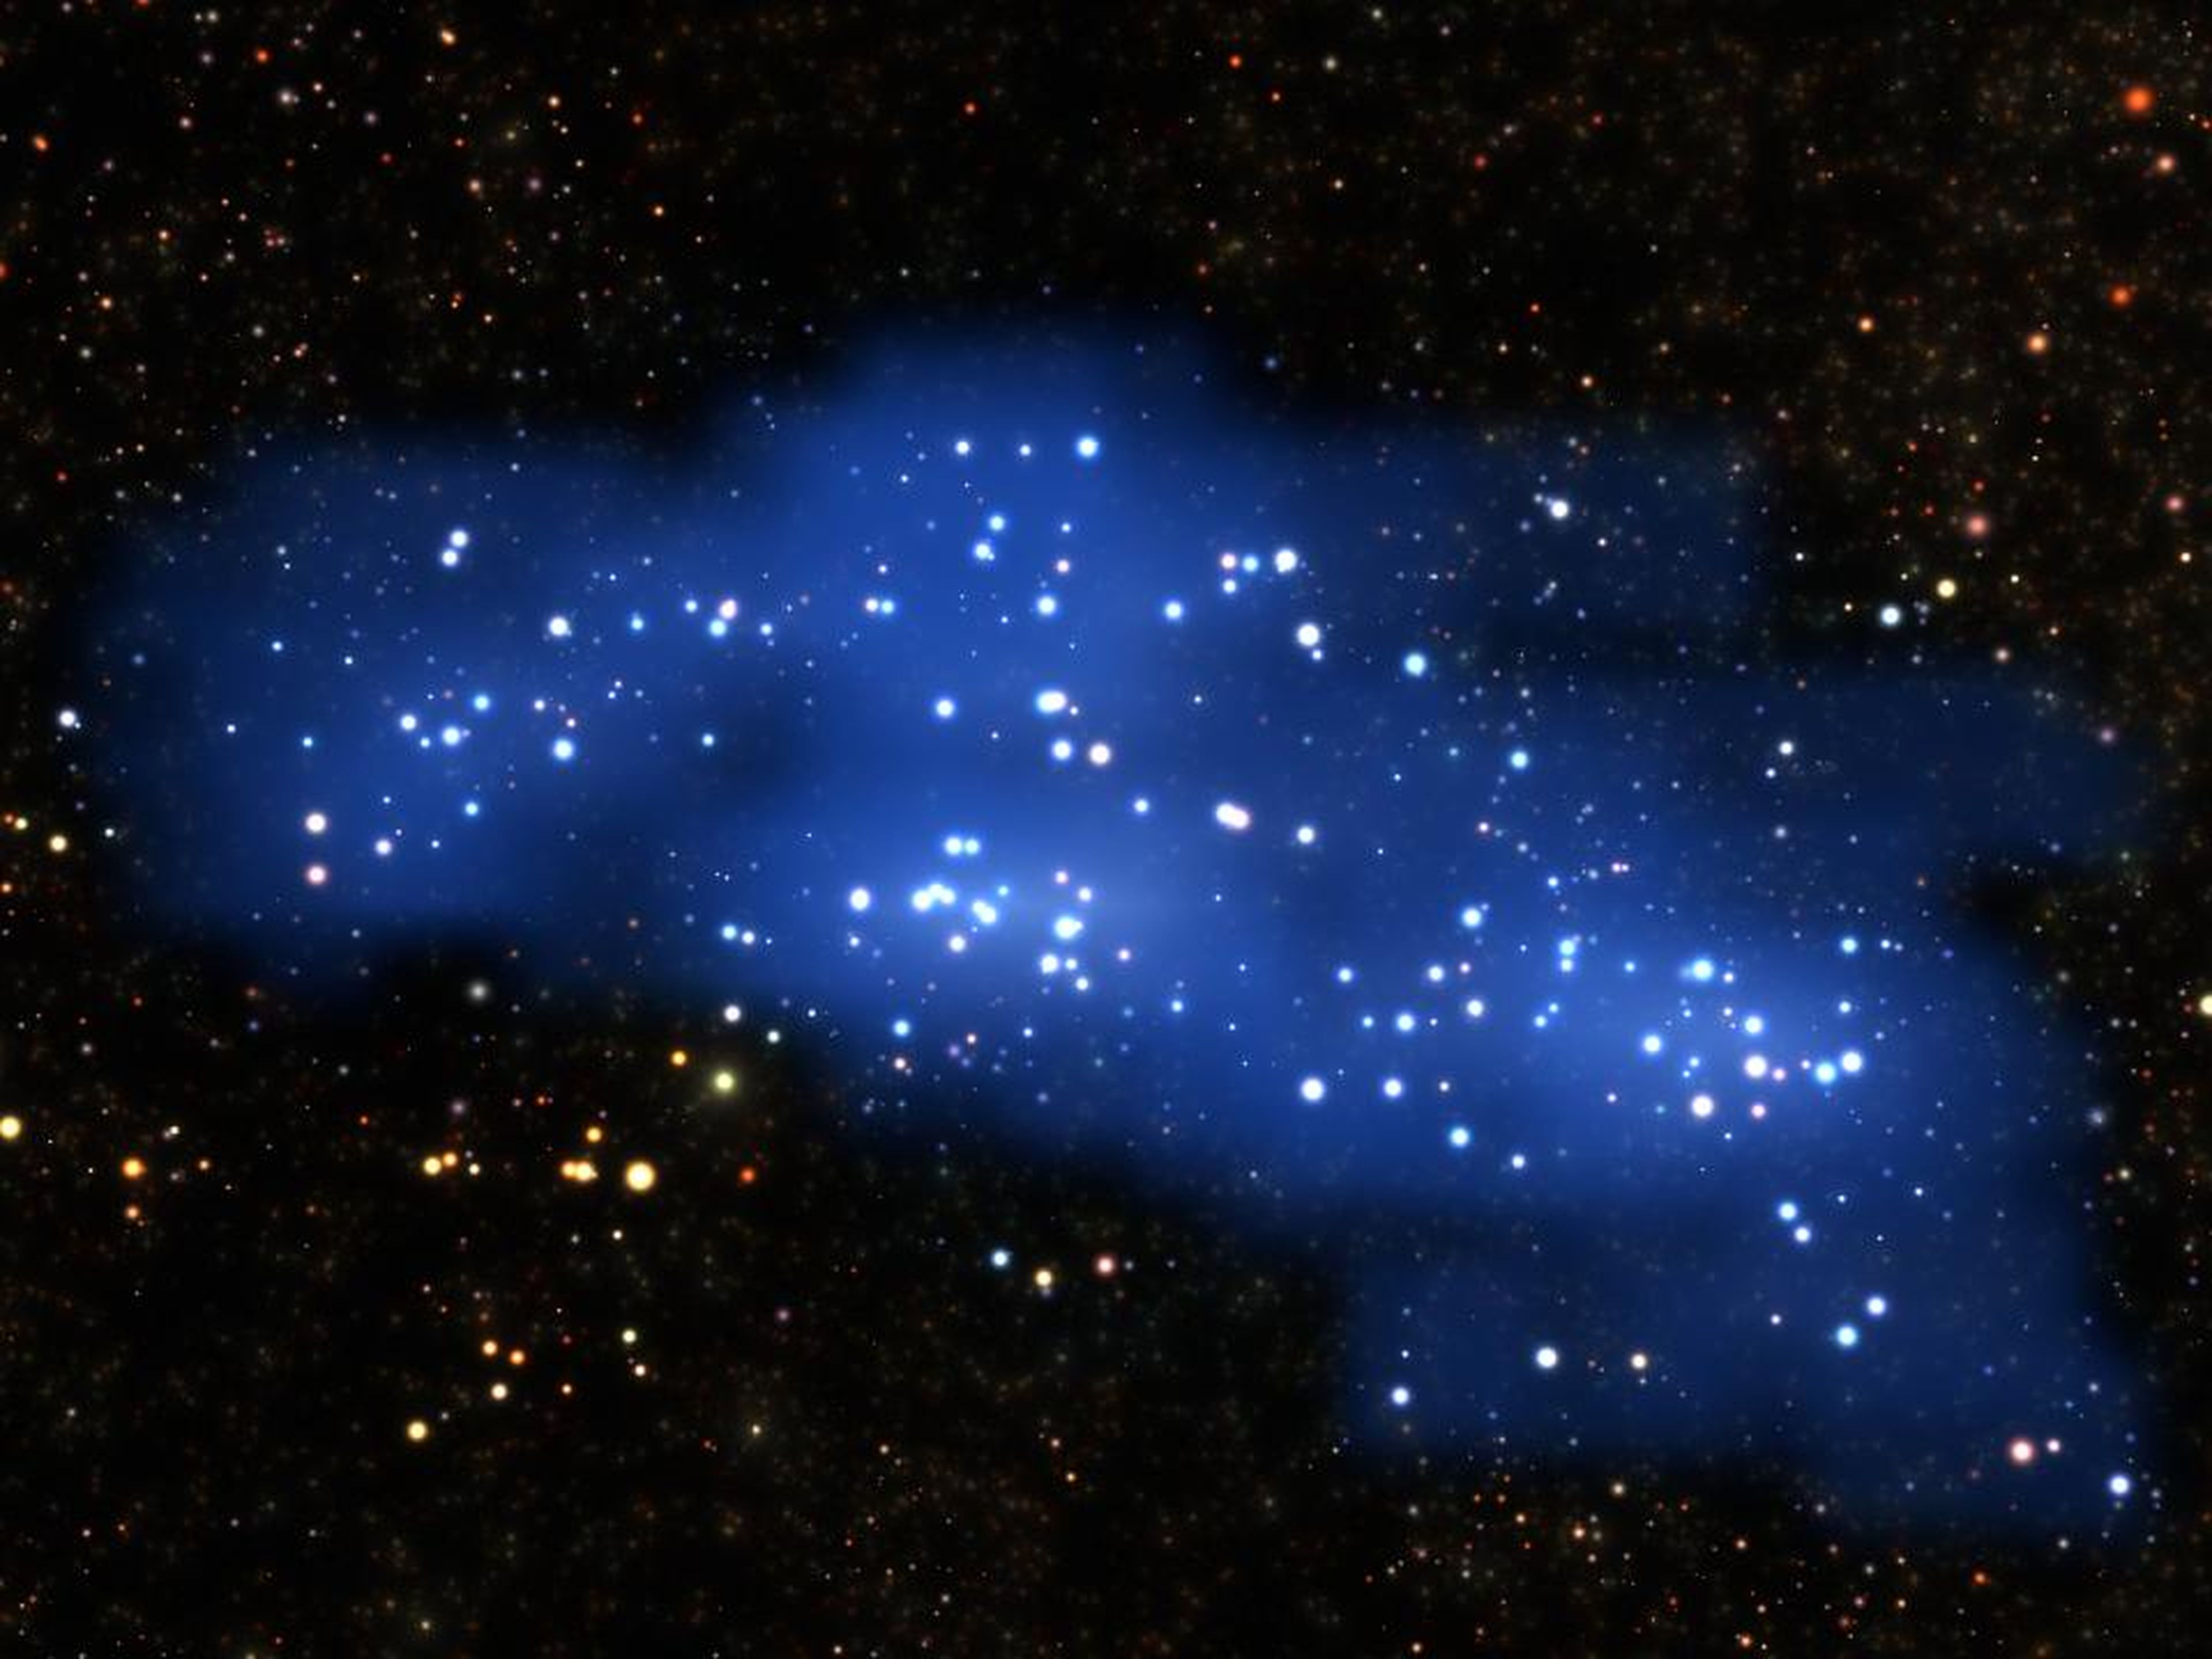 Supercluster Hyperion